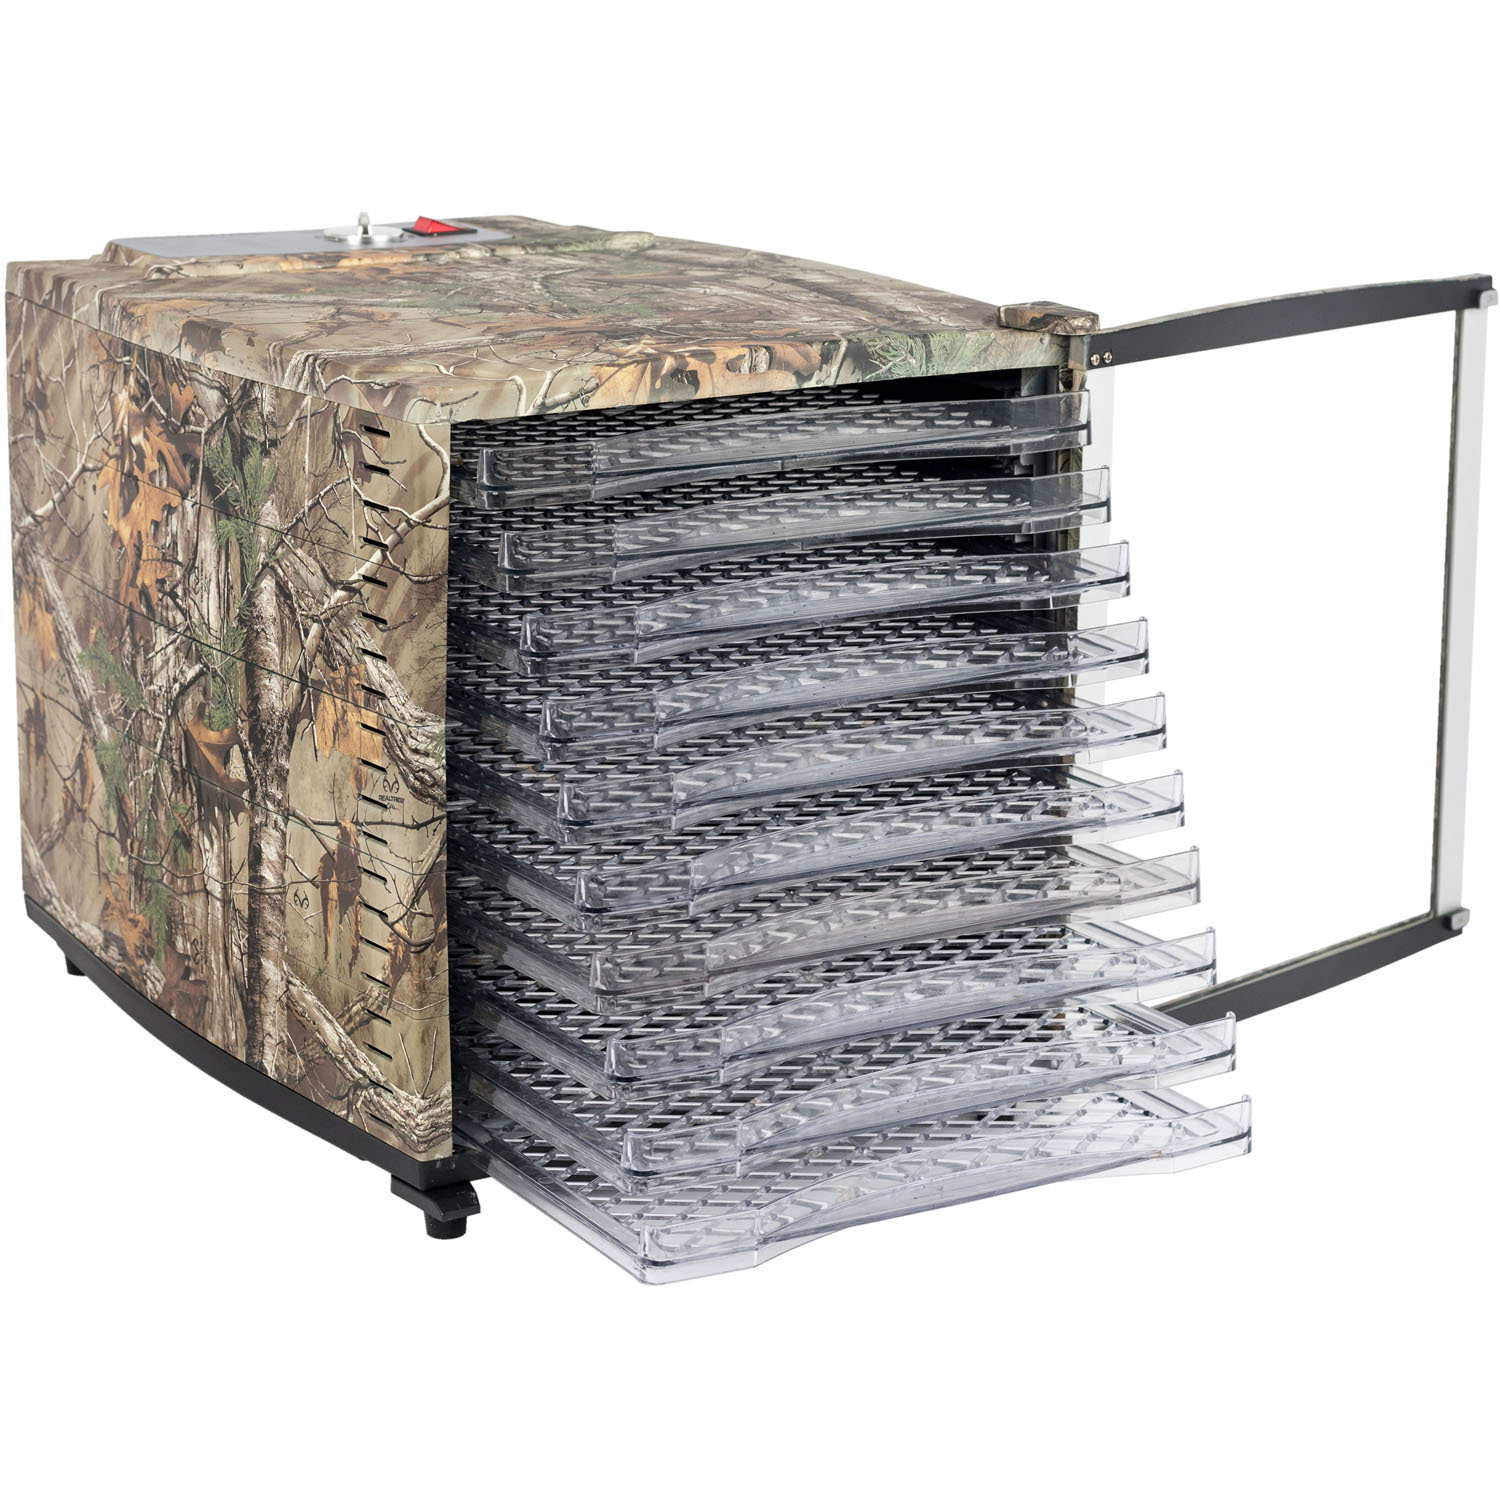 Magic Chef 10-Tray Food Dehydrator with Authentic Realtree Xtra Camouflage Pattern - image 3 of 5